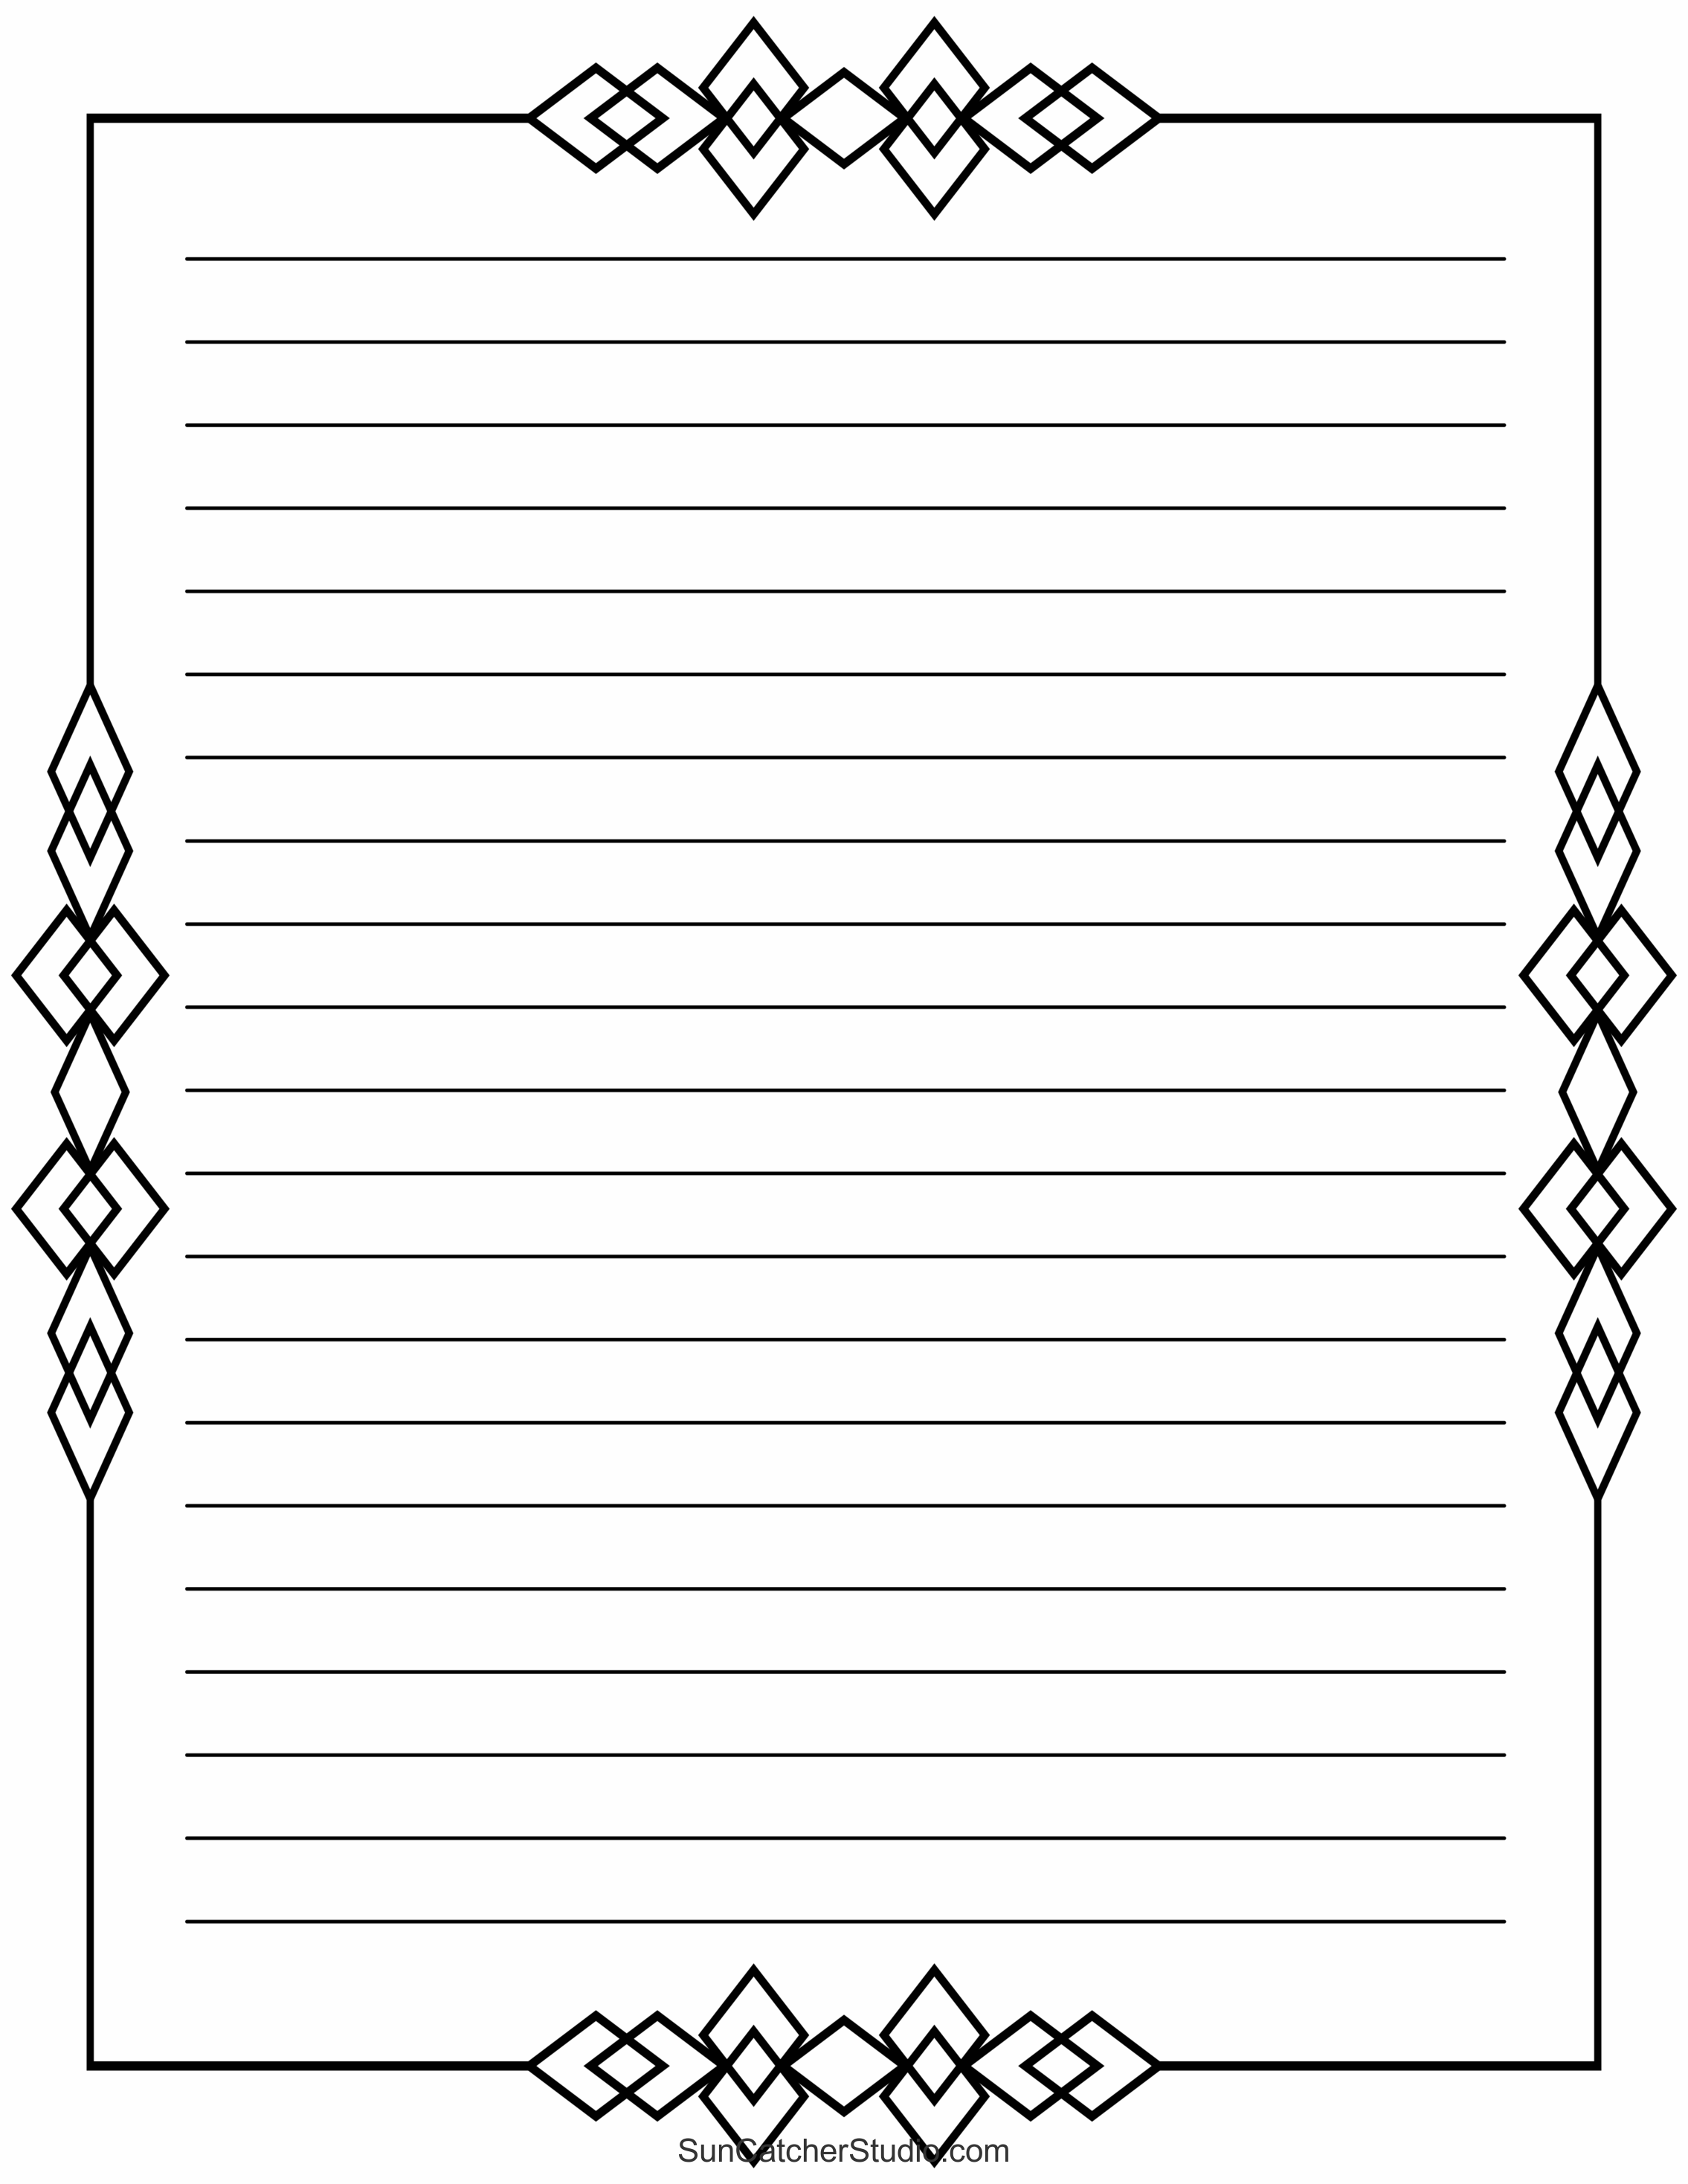 Free Printable Stationery And Lined Letter Writing Paper – Diy regarding Free Printable Lined Stationery